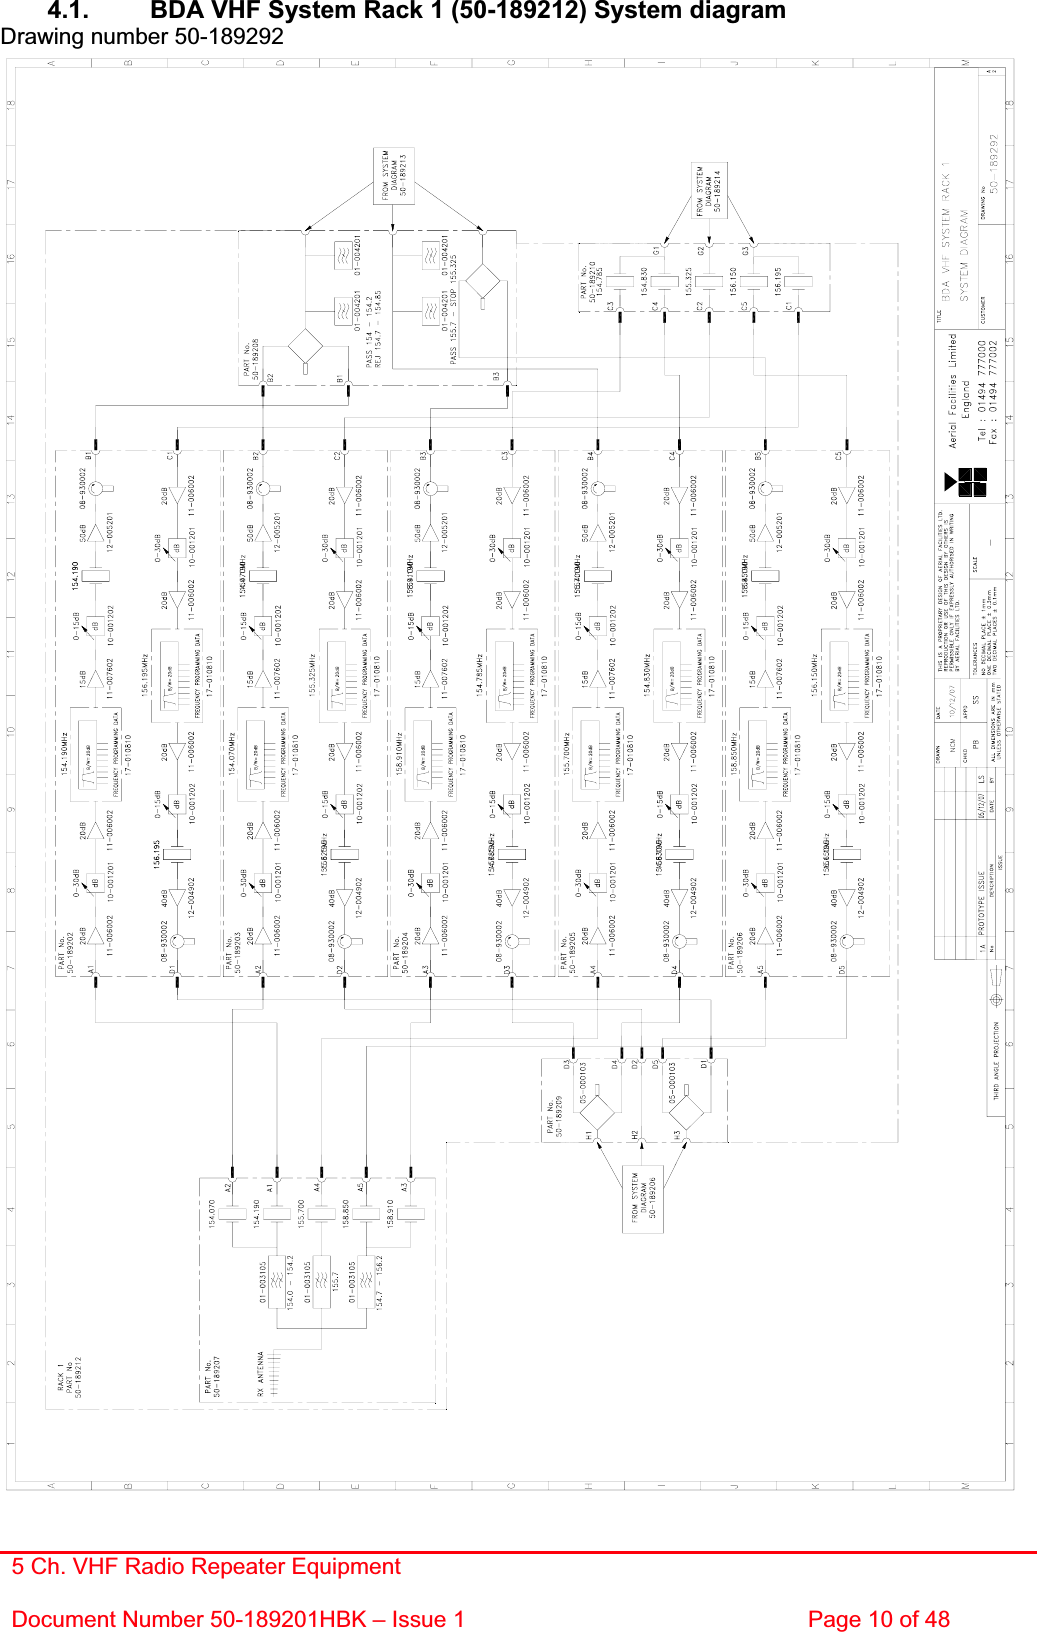 5 Ch. VHF Radio Repeater EquipmentDocument Number 50-189201HBK – Issue 1  Page 10 of 48 4.1.  BDA VHF System Rack 1 (50-189212) System diagram  Drawing number 50-189292 